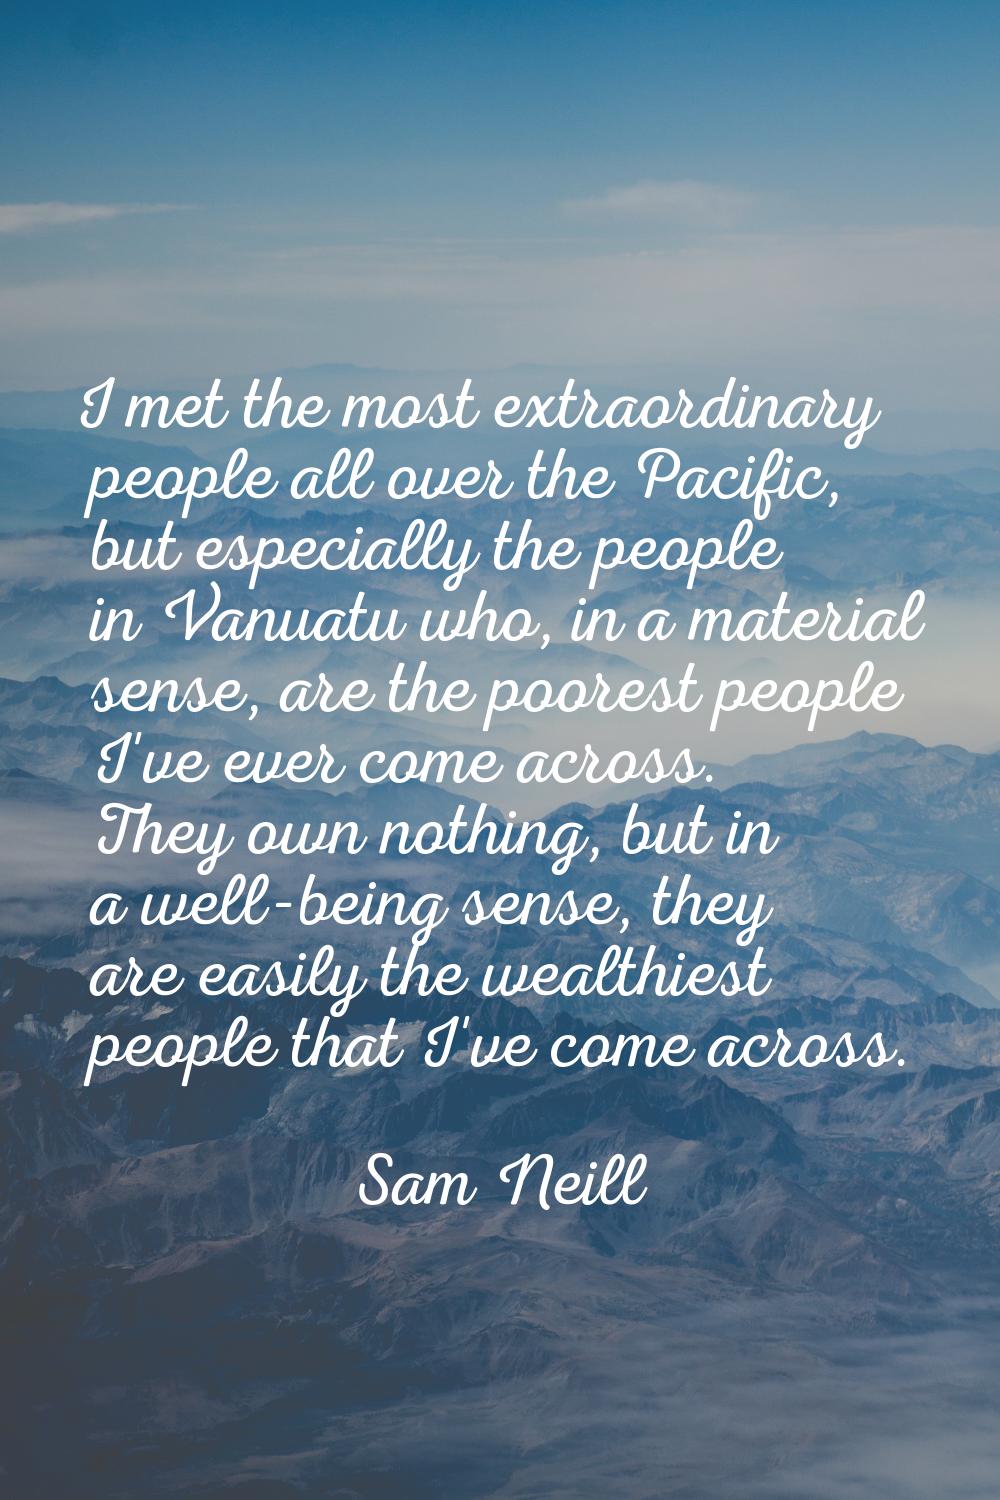 I met the most extraordinary people all over the Pacific, but especially the people in Vanuatu who,